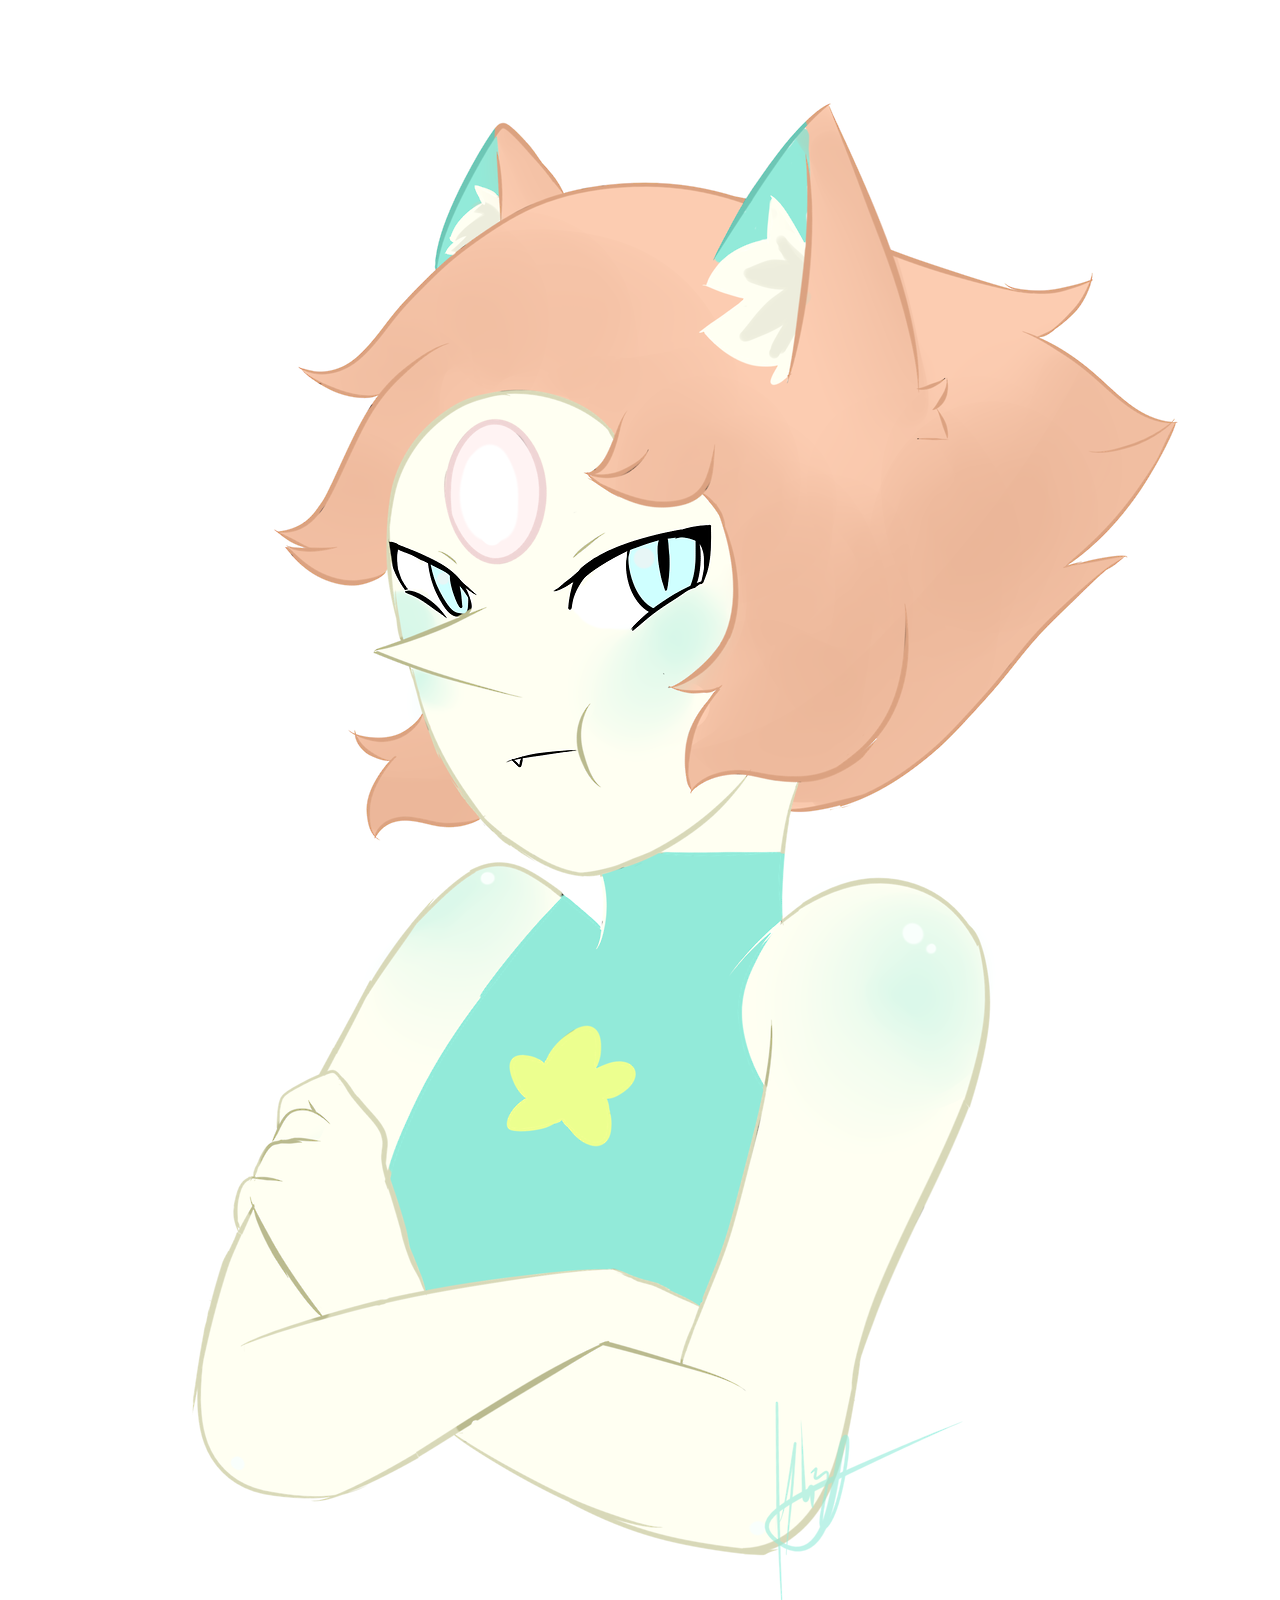 just a cat Pearl :^)